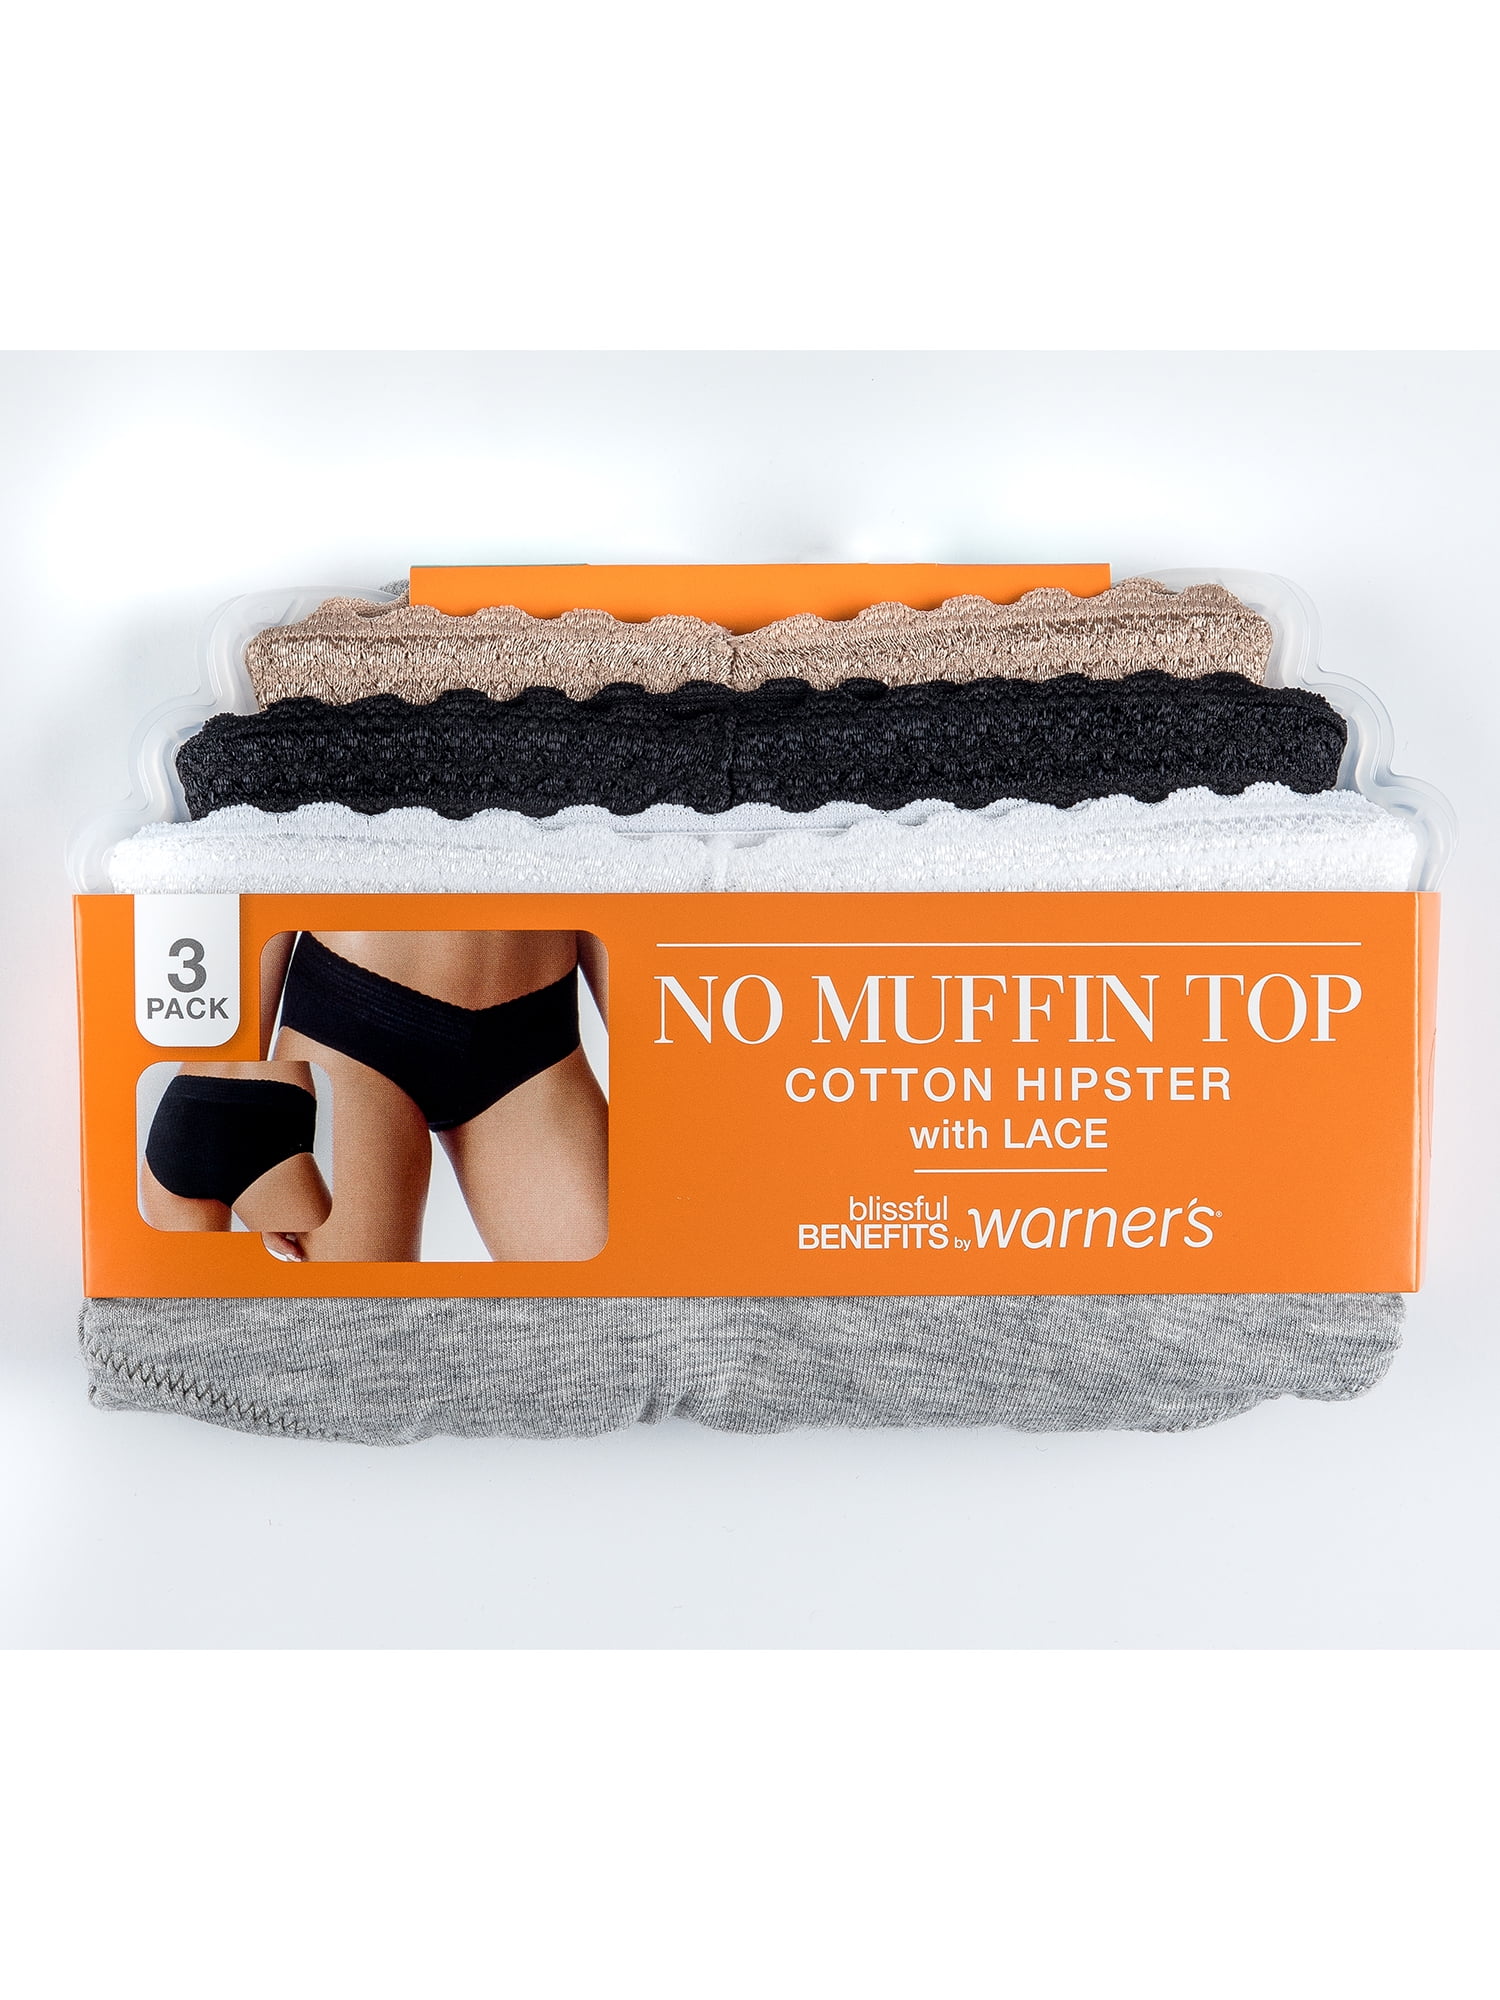 Blissful Benefits by Warner's No Muffin Top Cotton Stretch Lace Hipster,  3-Pack - Discount Scrubs and Fashion